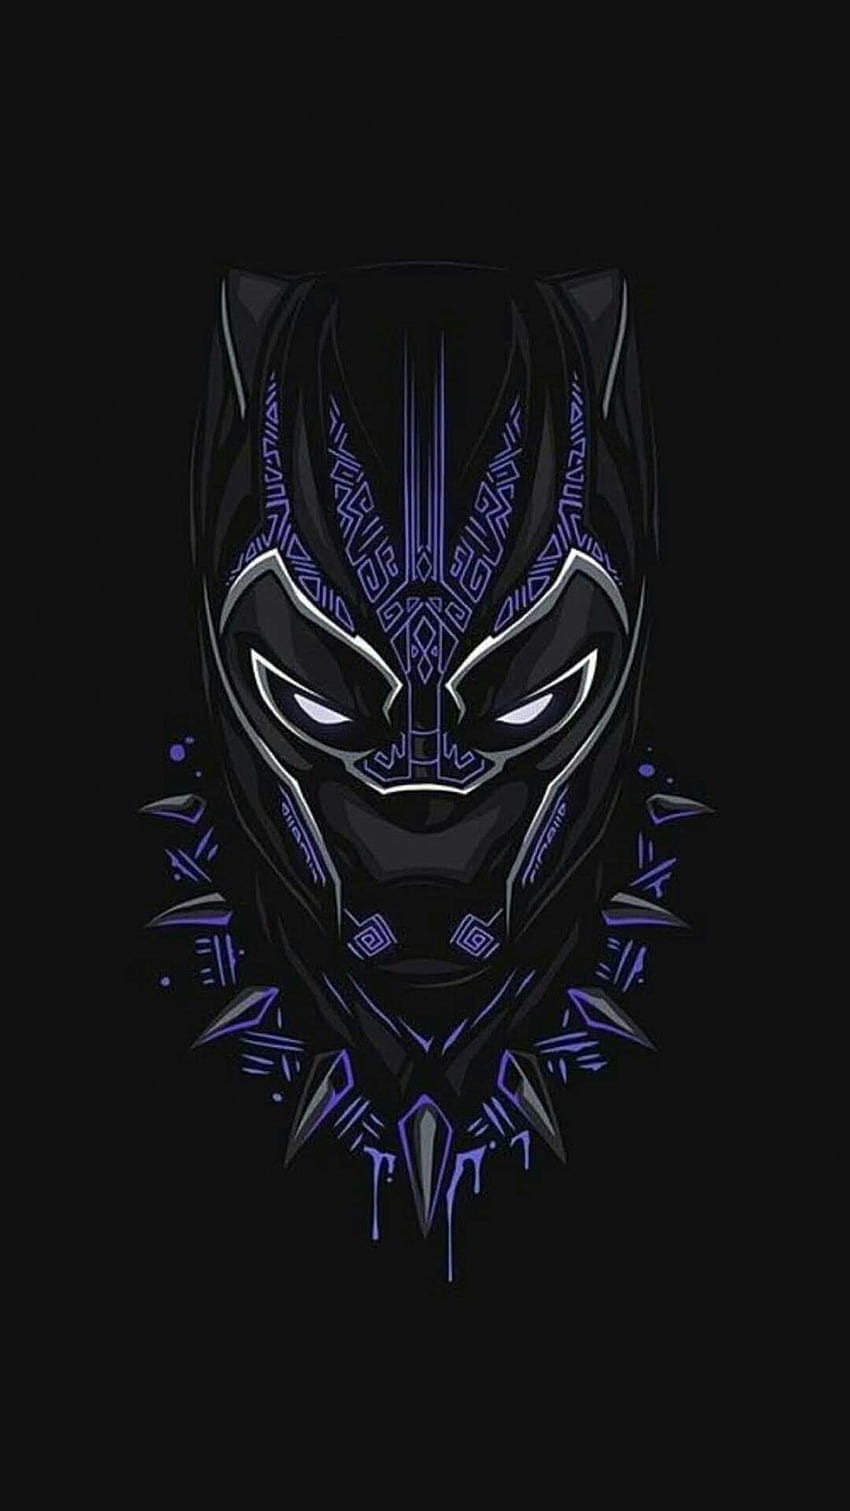 1080x1920 / 1080x1920 black panther, avengers infinity war, 2018 movies,  movies, hd, poster for Iphone 6, 7, 8 wallpaper - Coolwallpapers.me!